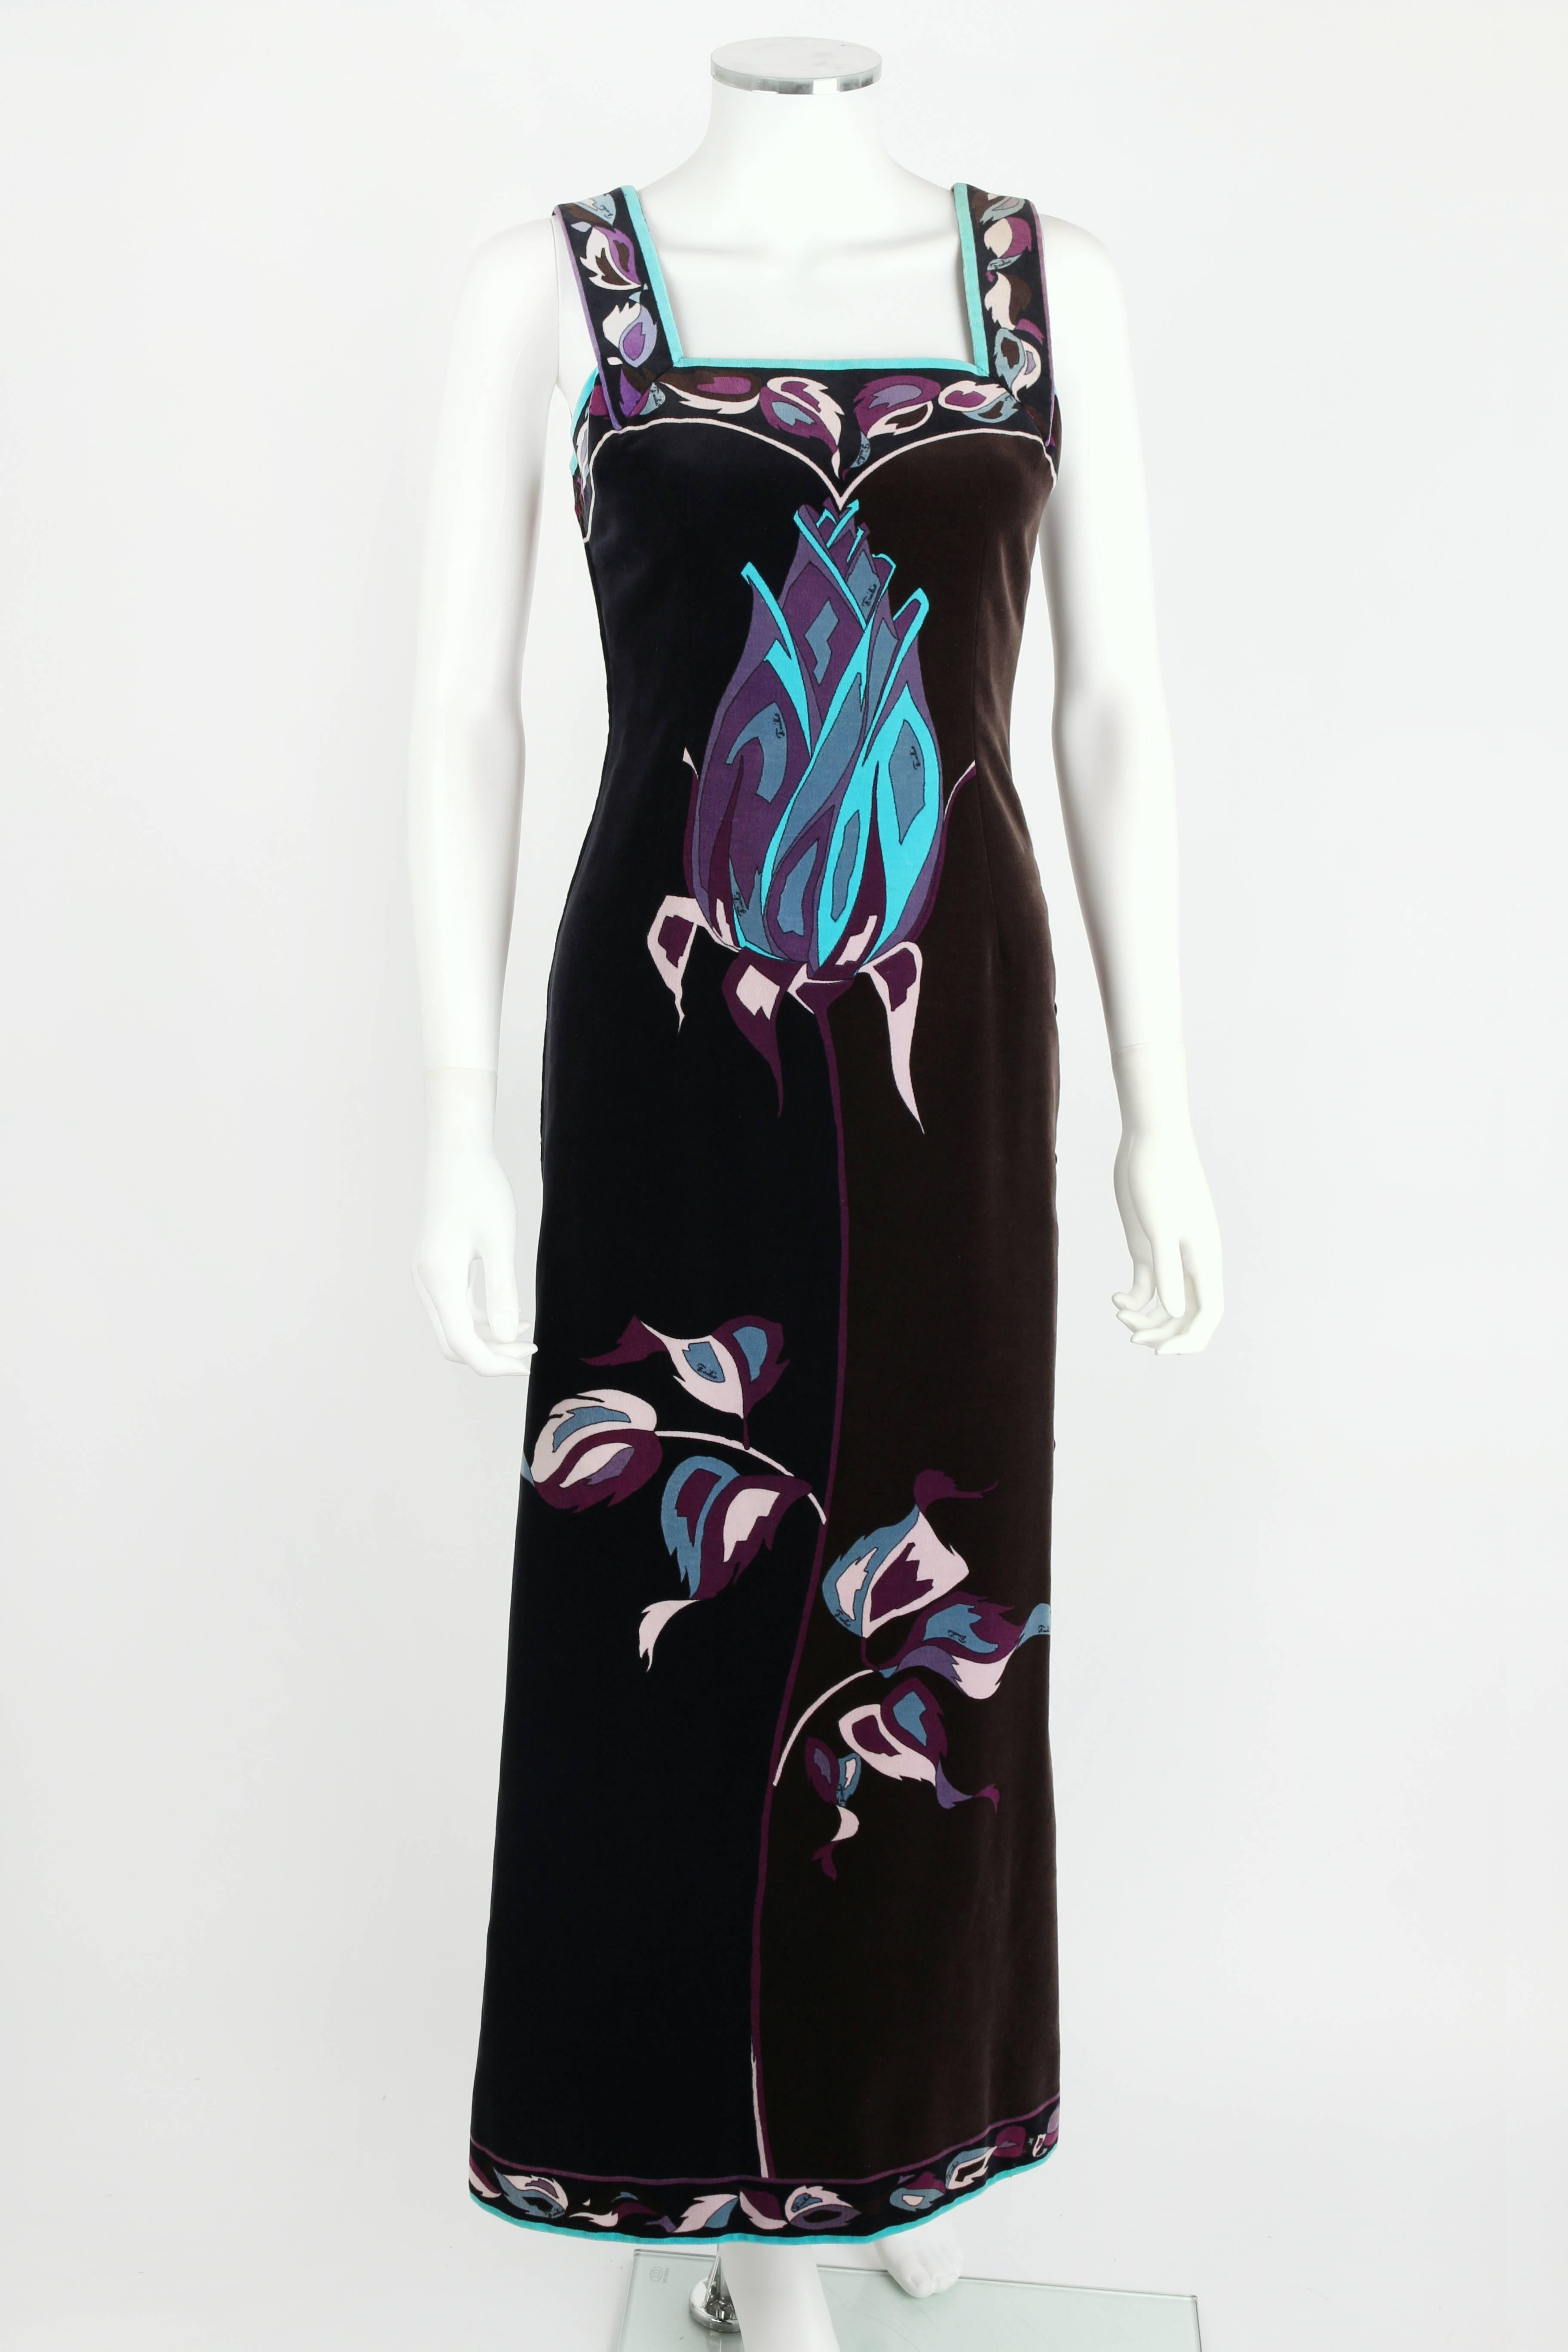 Vintage c.1960s Emilio Pucci velveteen maxi dress. Large blue, purple, and white rose print on the front and back. Sleeveless with square neckline at front and back. Left side has button detail and closes with hidden snaps. Zips at right side. Fully